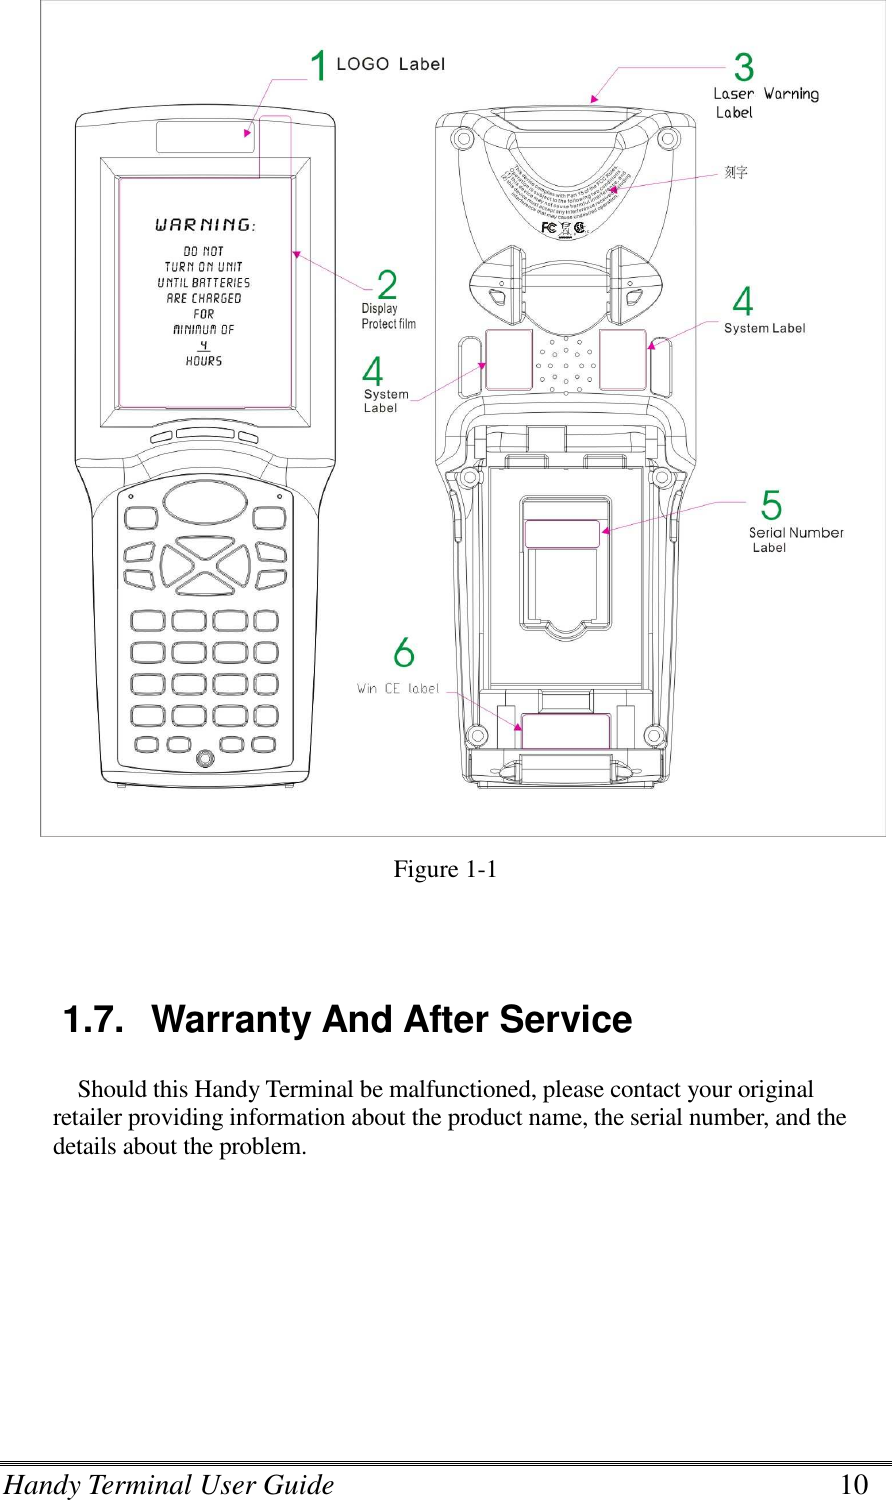 Handy Terminal User Guide      10  Figure 1-1   1.7.  Warranty And After Service Should this Handy Terminal be malfunctioned, please contact your original retailer providing information about the product name, the serial number, and the details about the problem.   